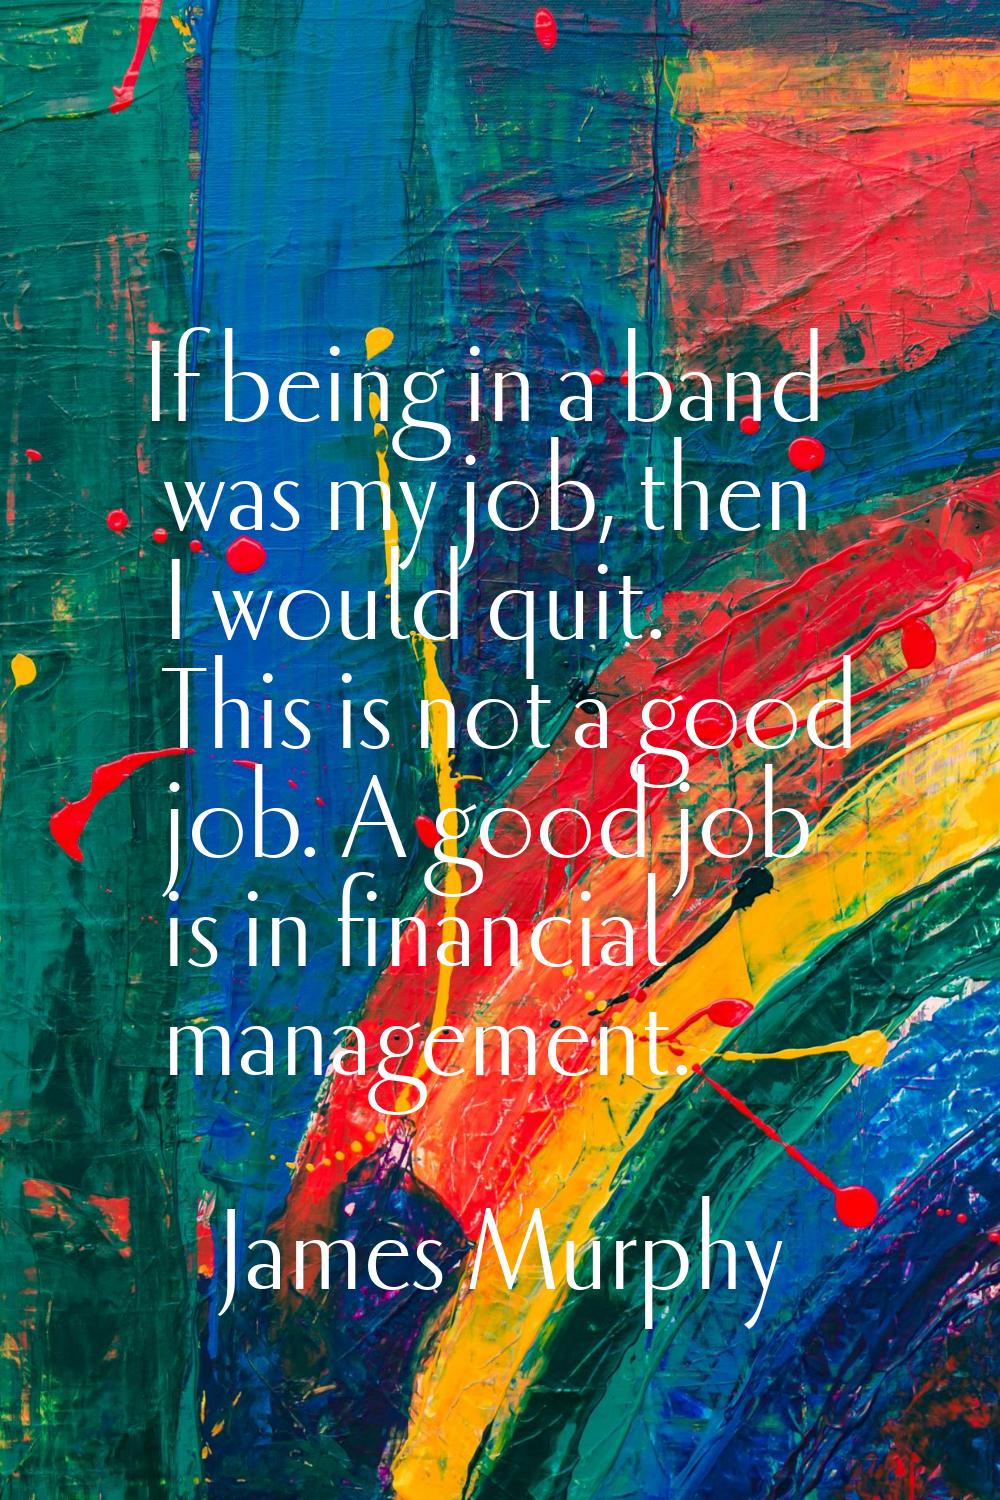 If being in a band was my job, then I would quit. This is not a good job. A good job is in financia